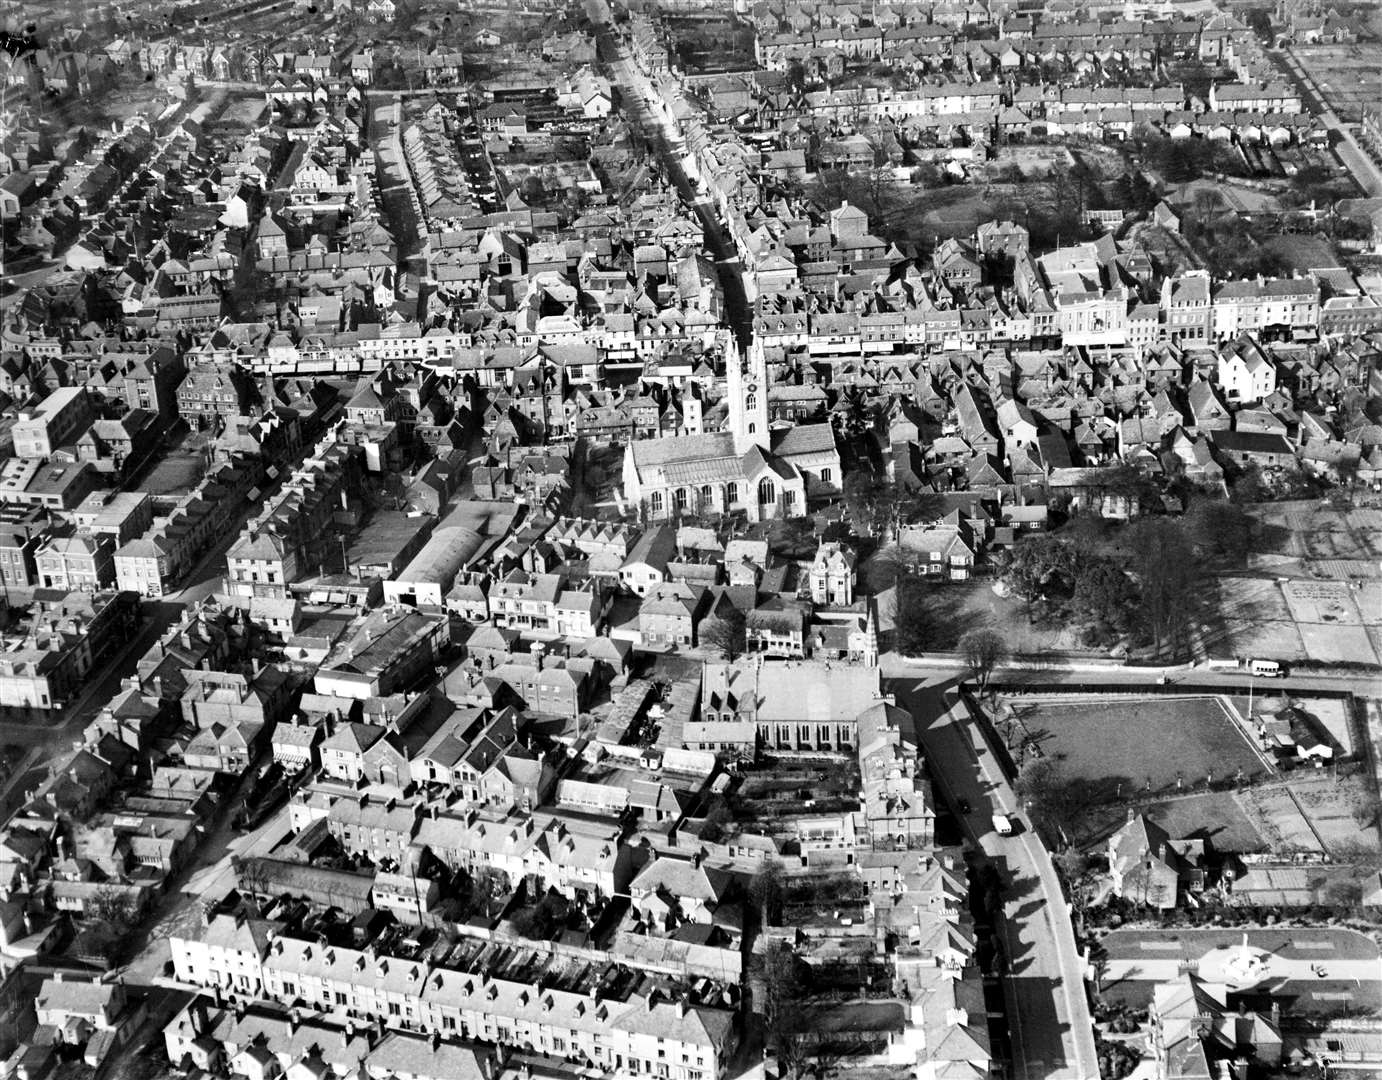 Ashford town centre, pictured in the 1920s